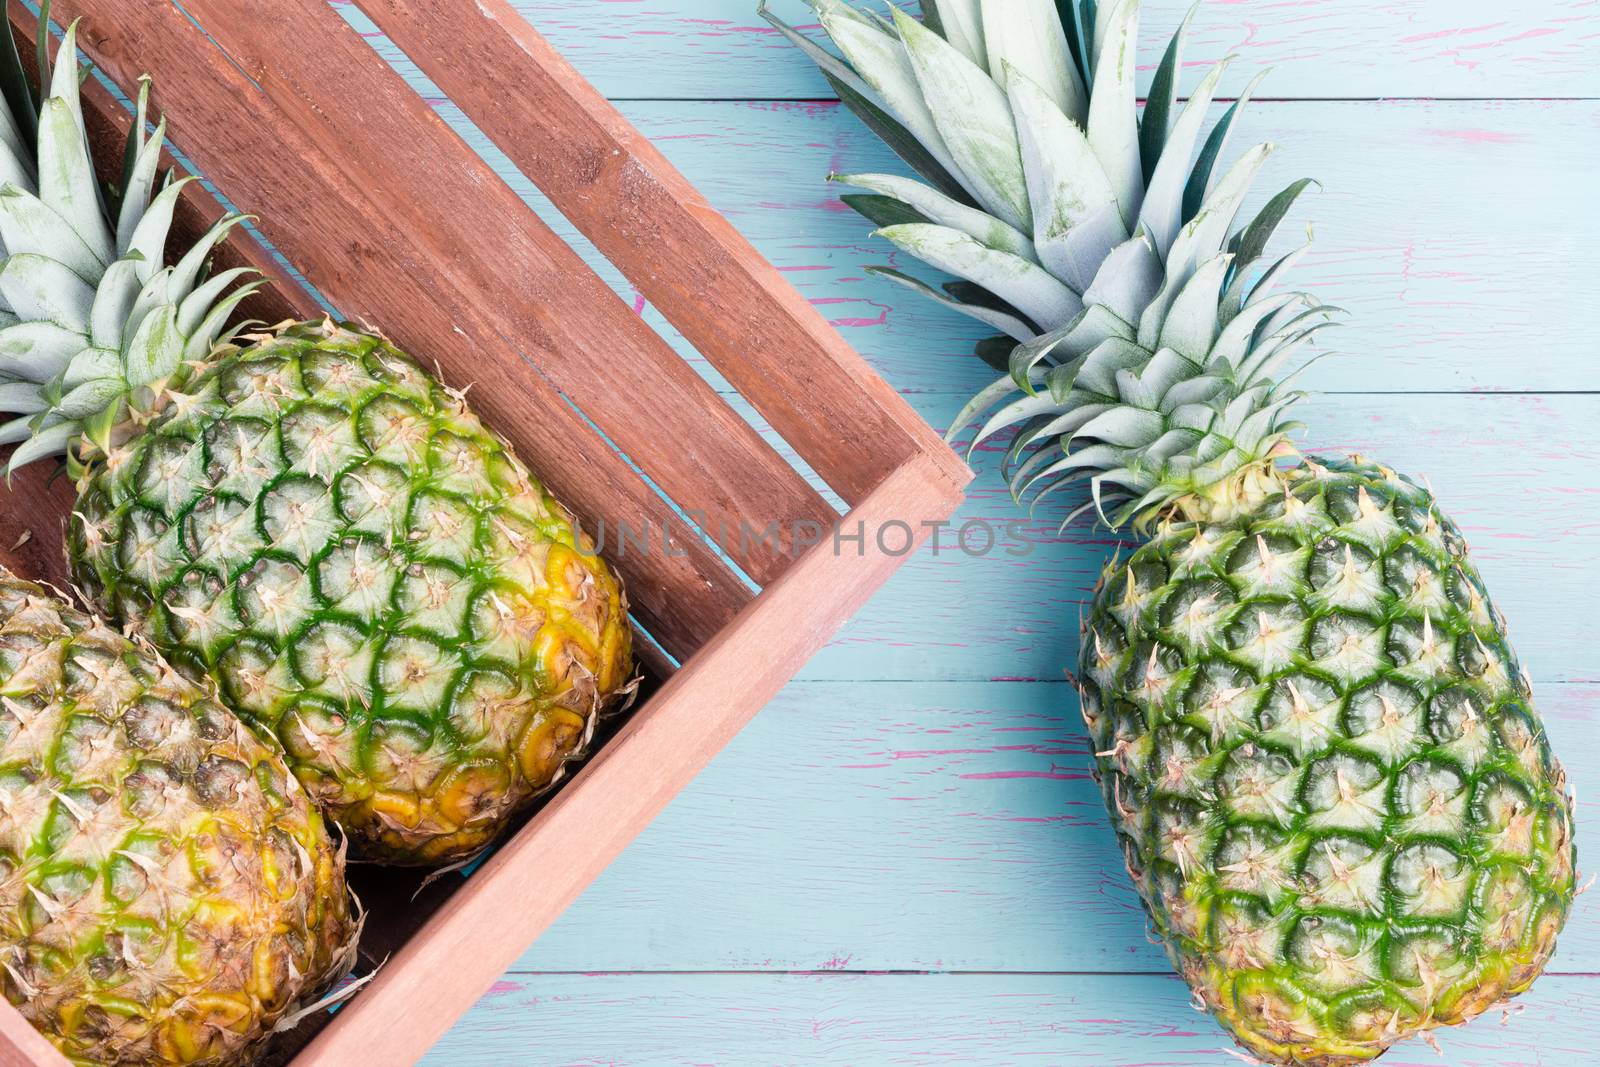 Three fresh pineapples, two in a wooden crate by coskun